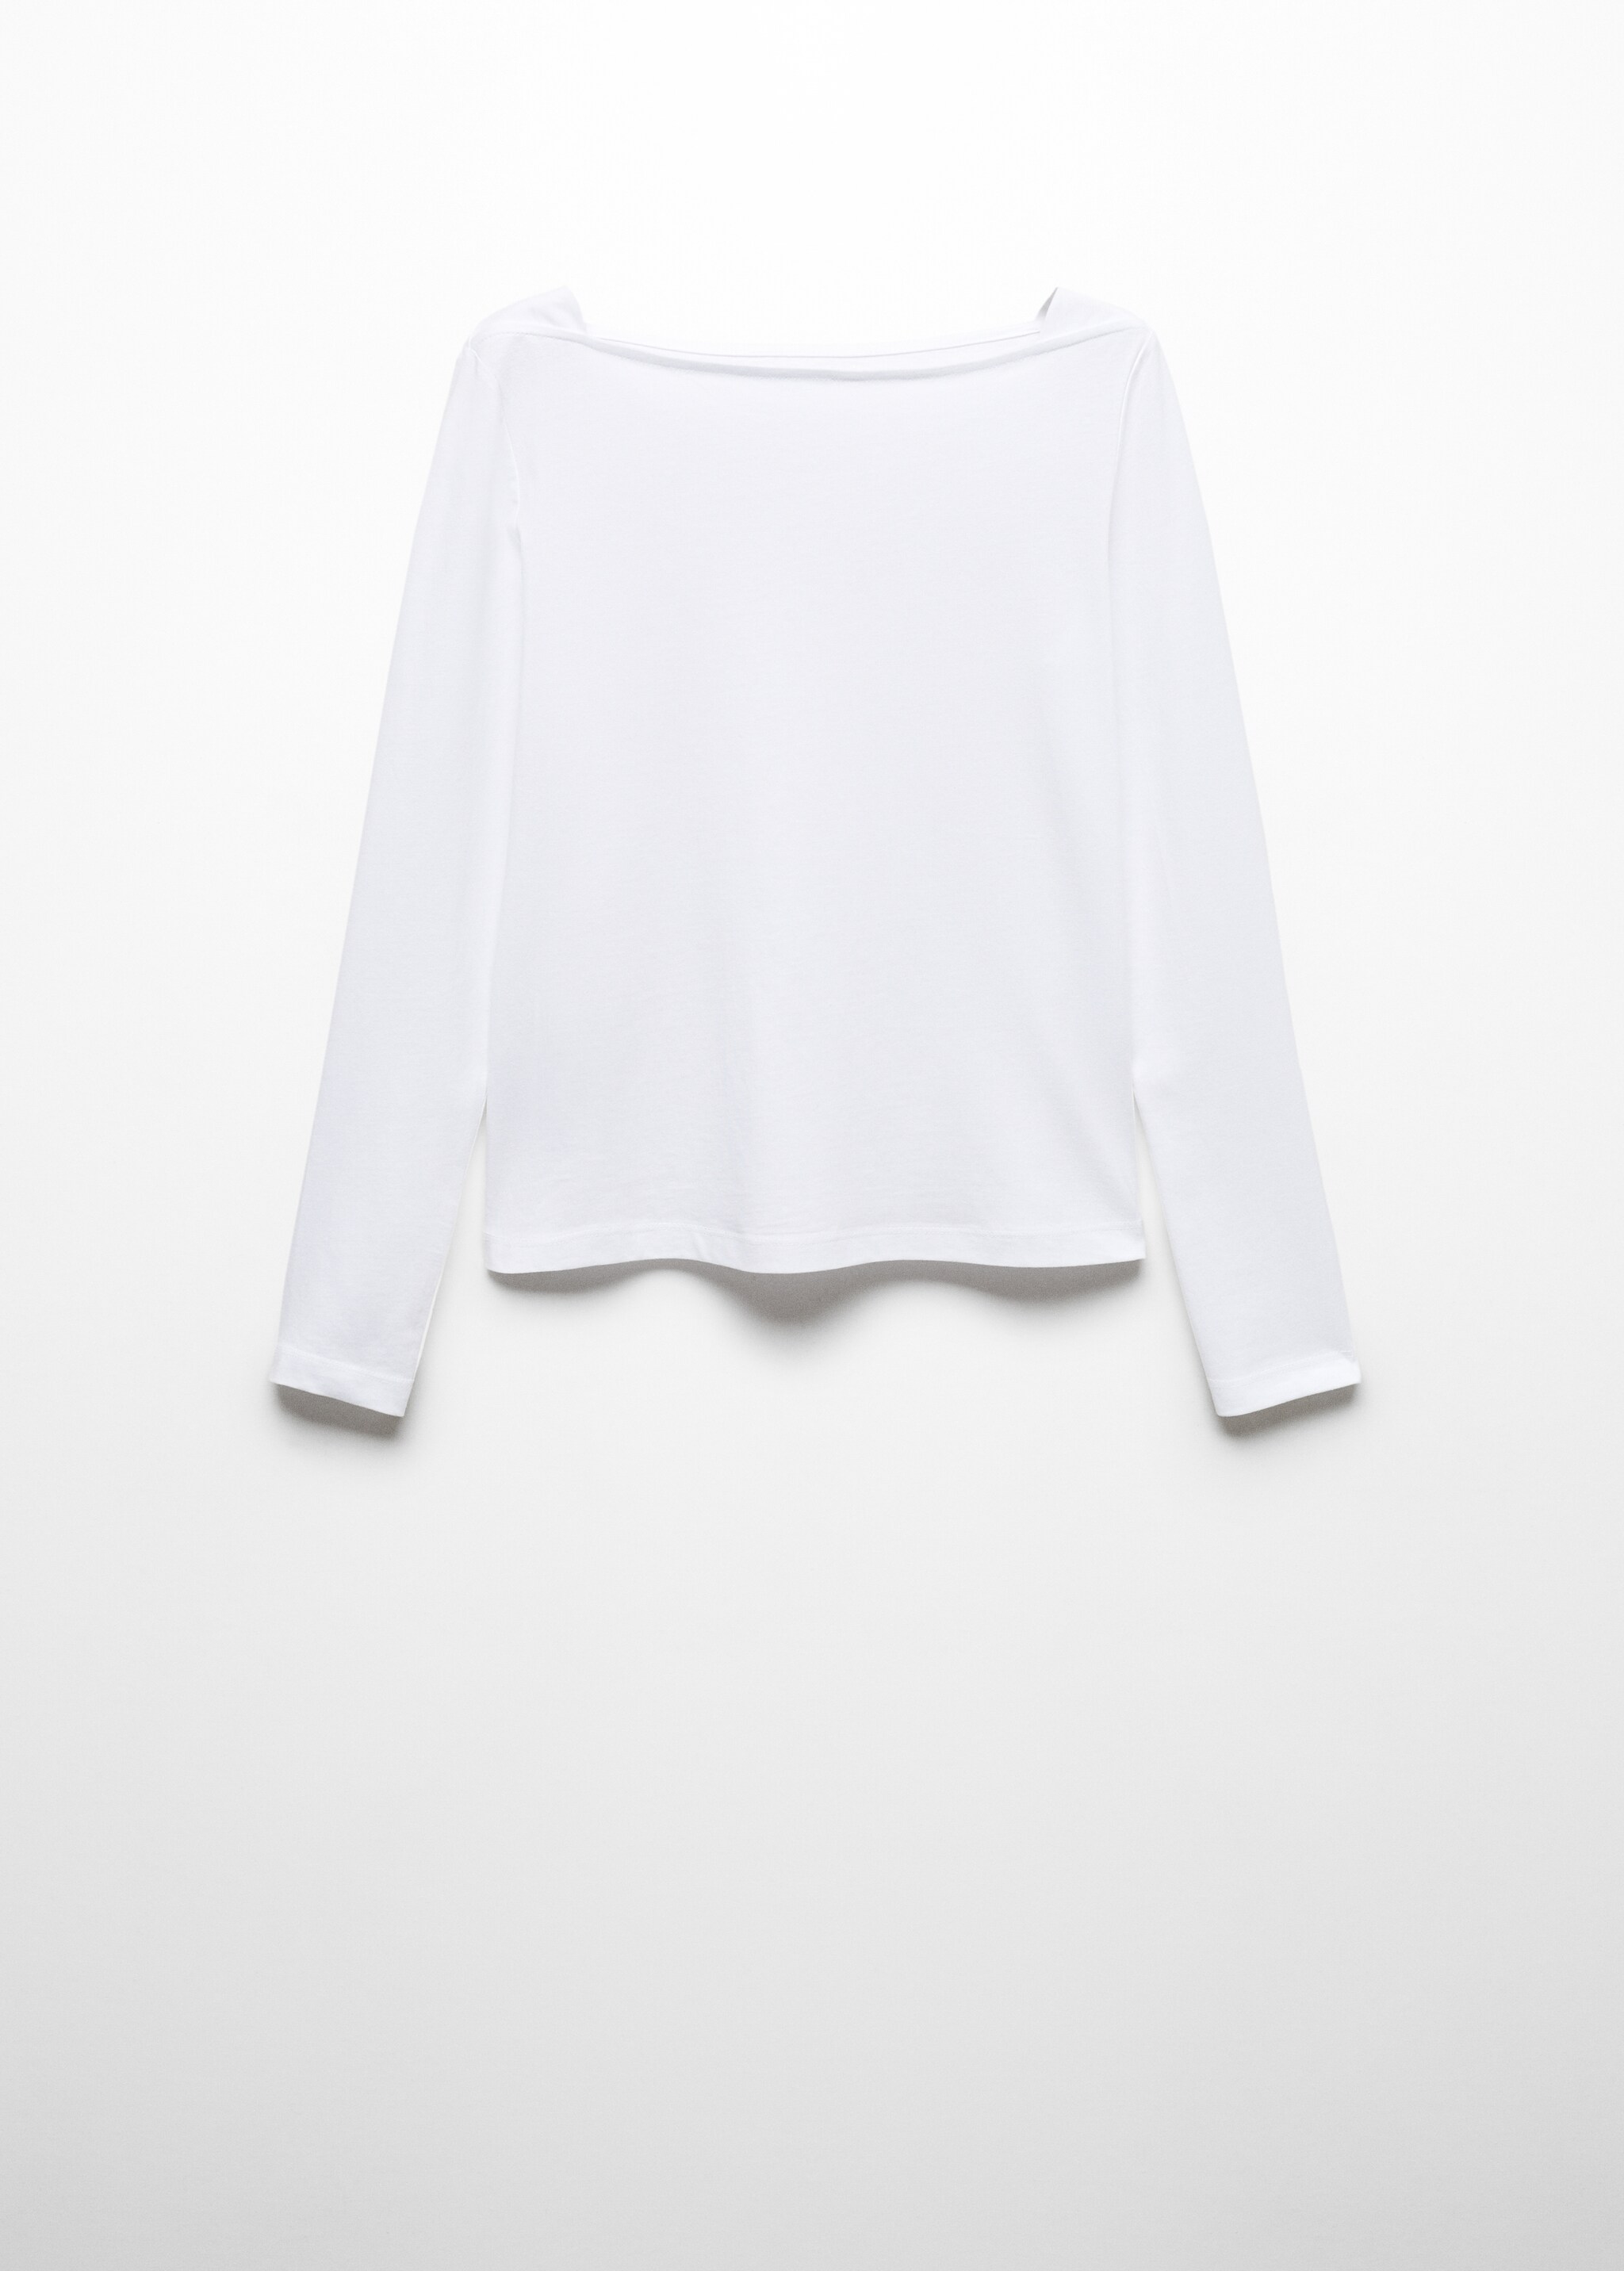 Cotton boat neck t-shirt - Article without model